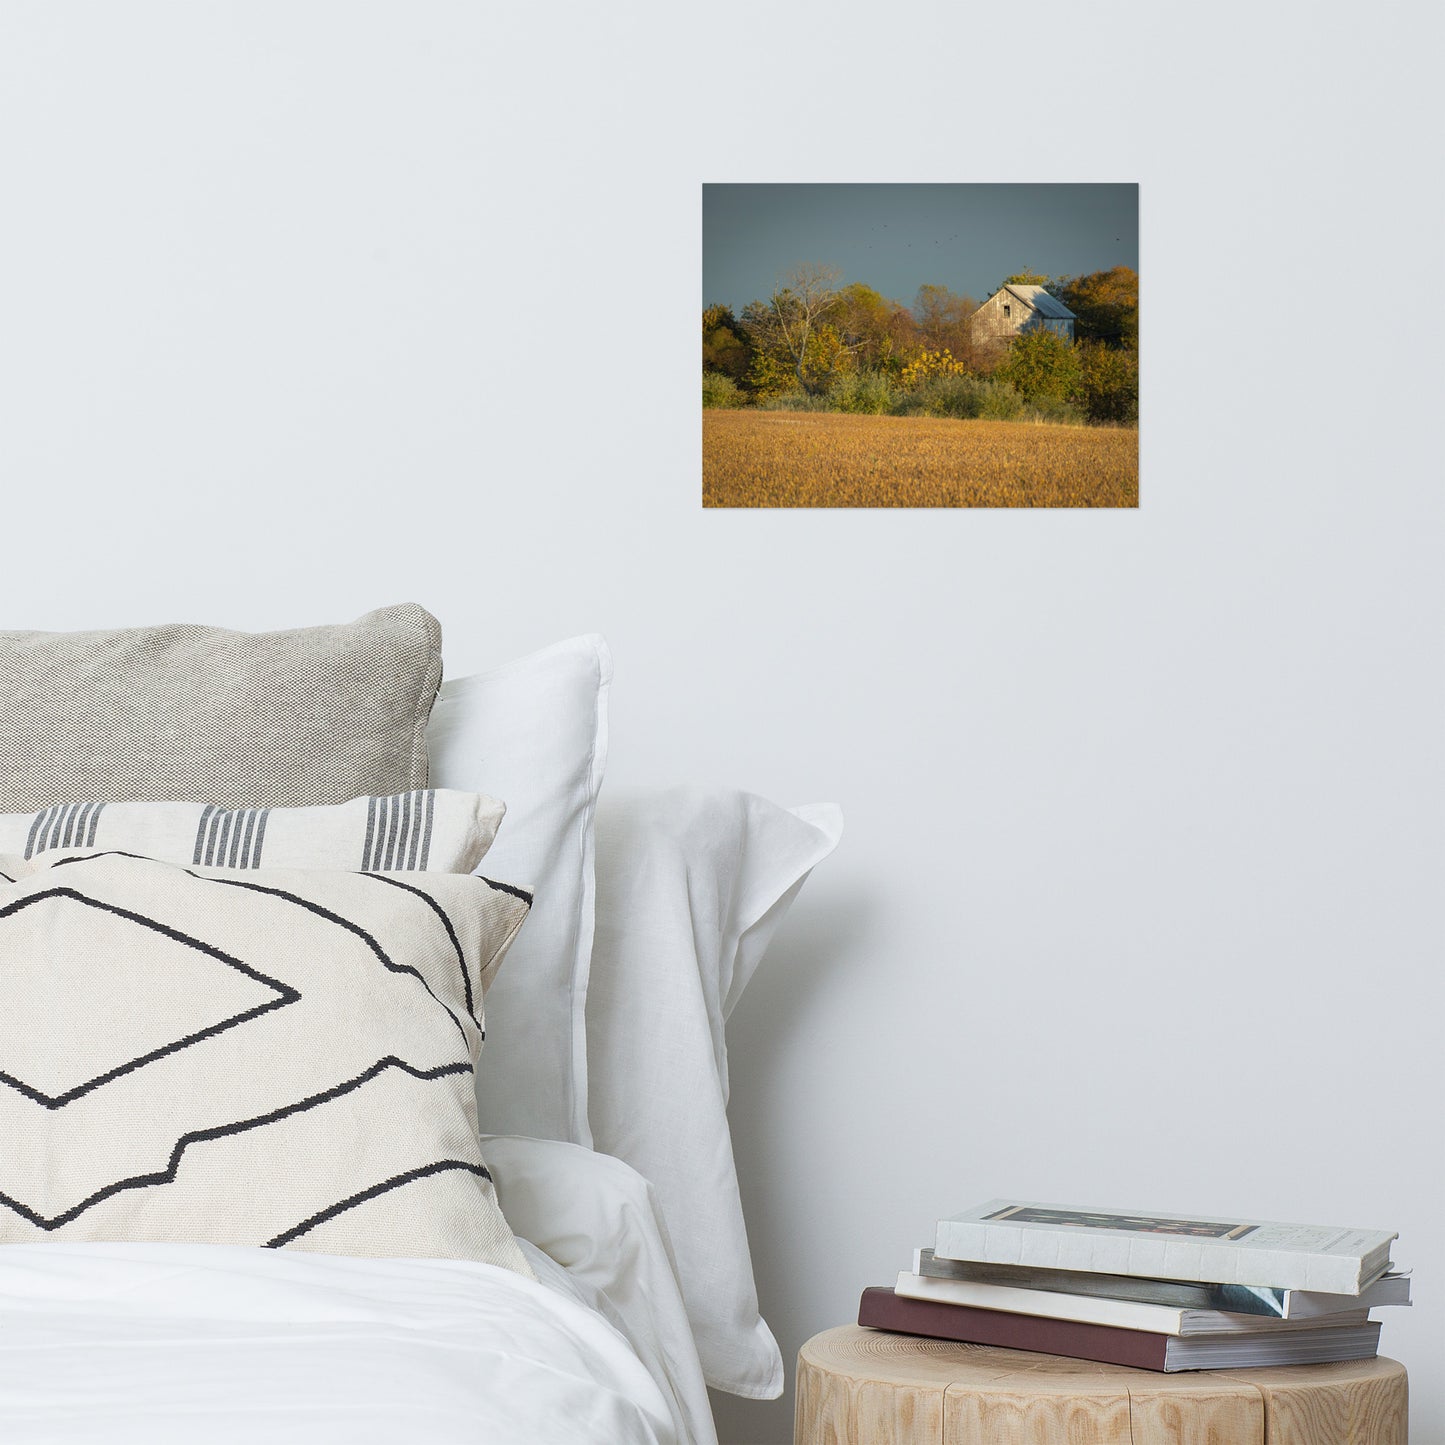 Country Farmhouse Wall Decor: Abandoned Barn In The Trees Landscape Photo Loose Wall Art Prints